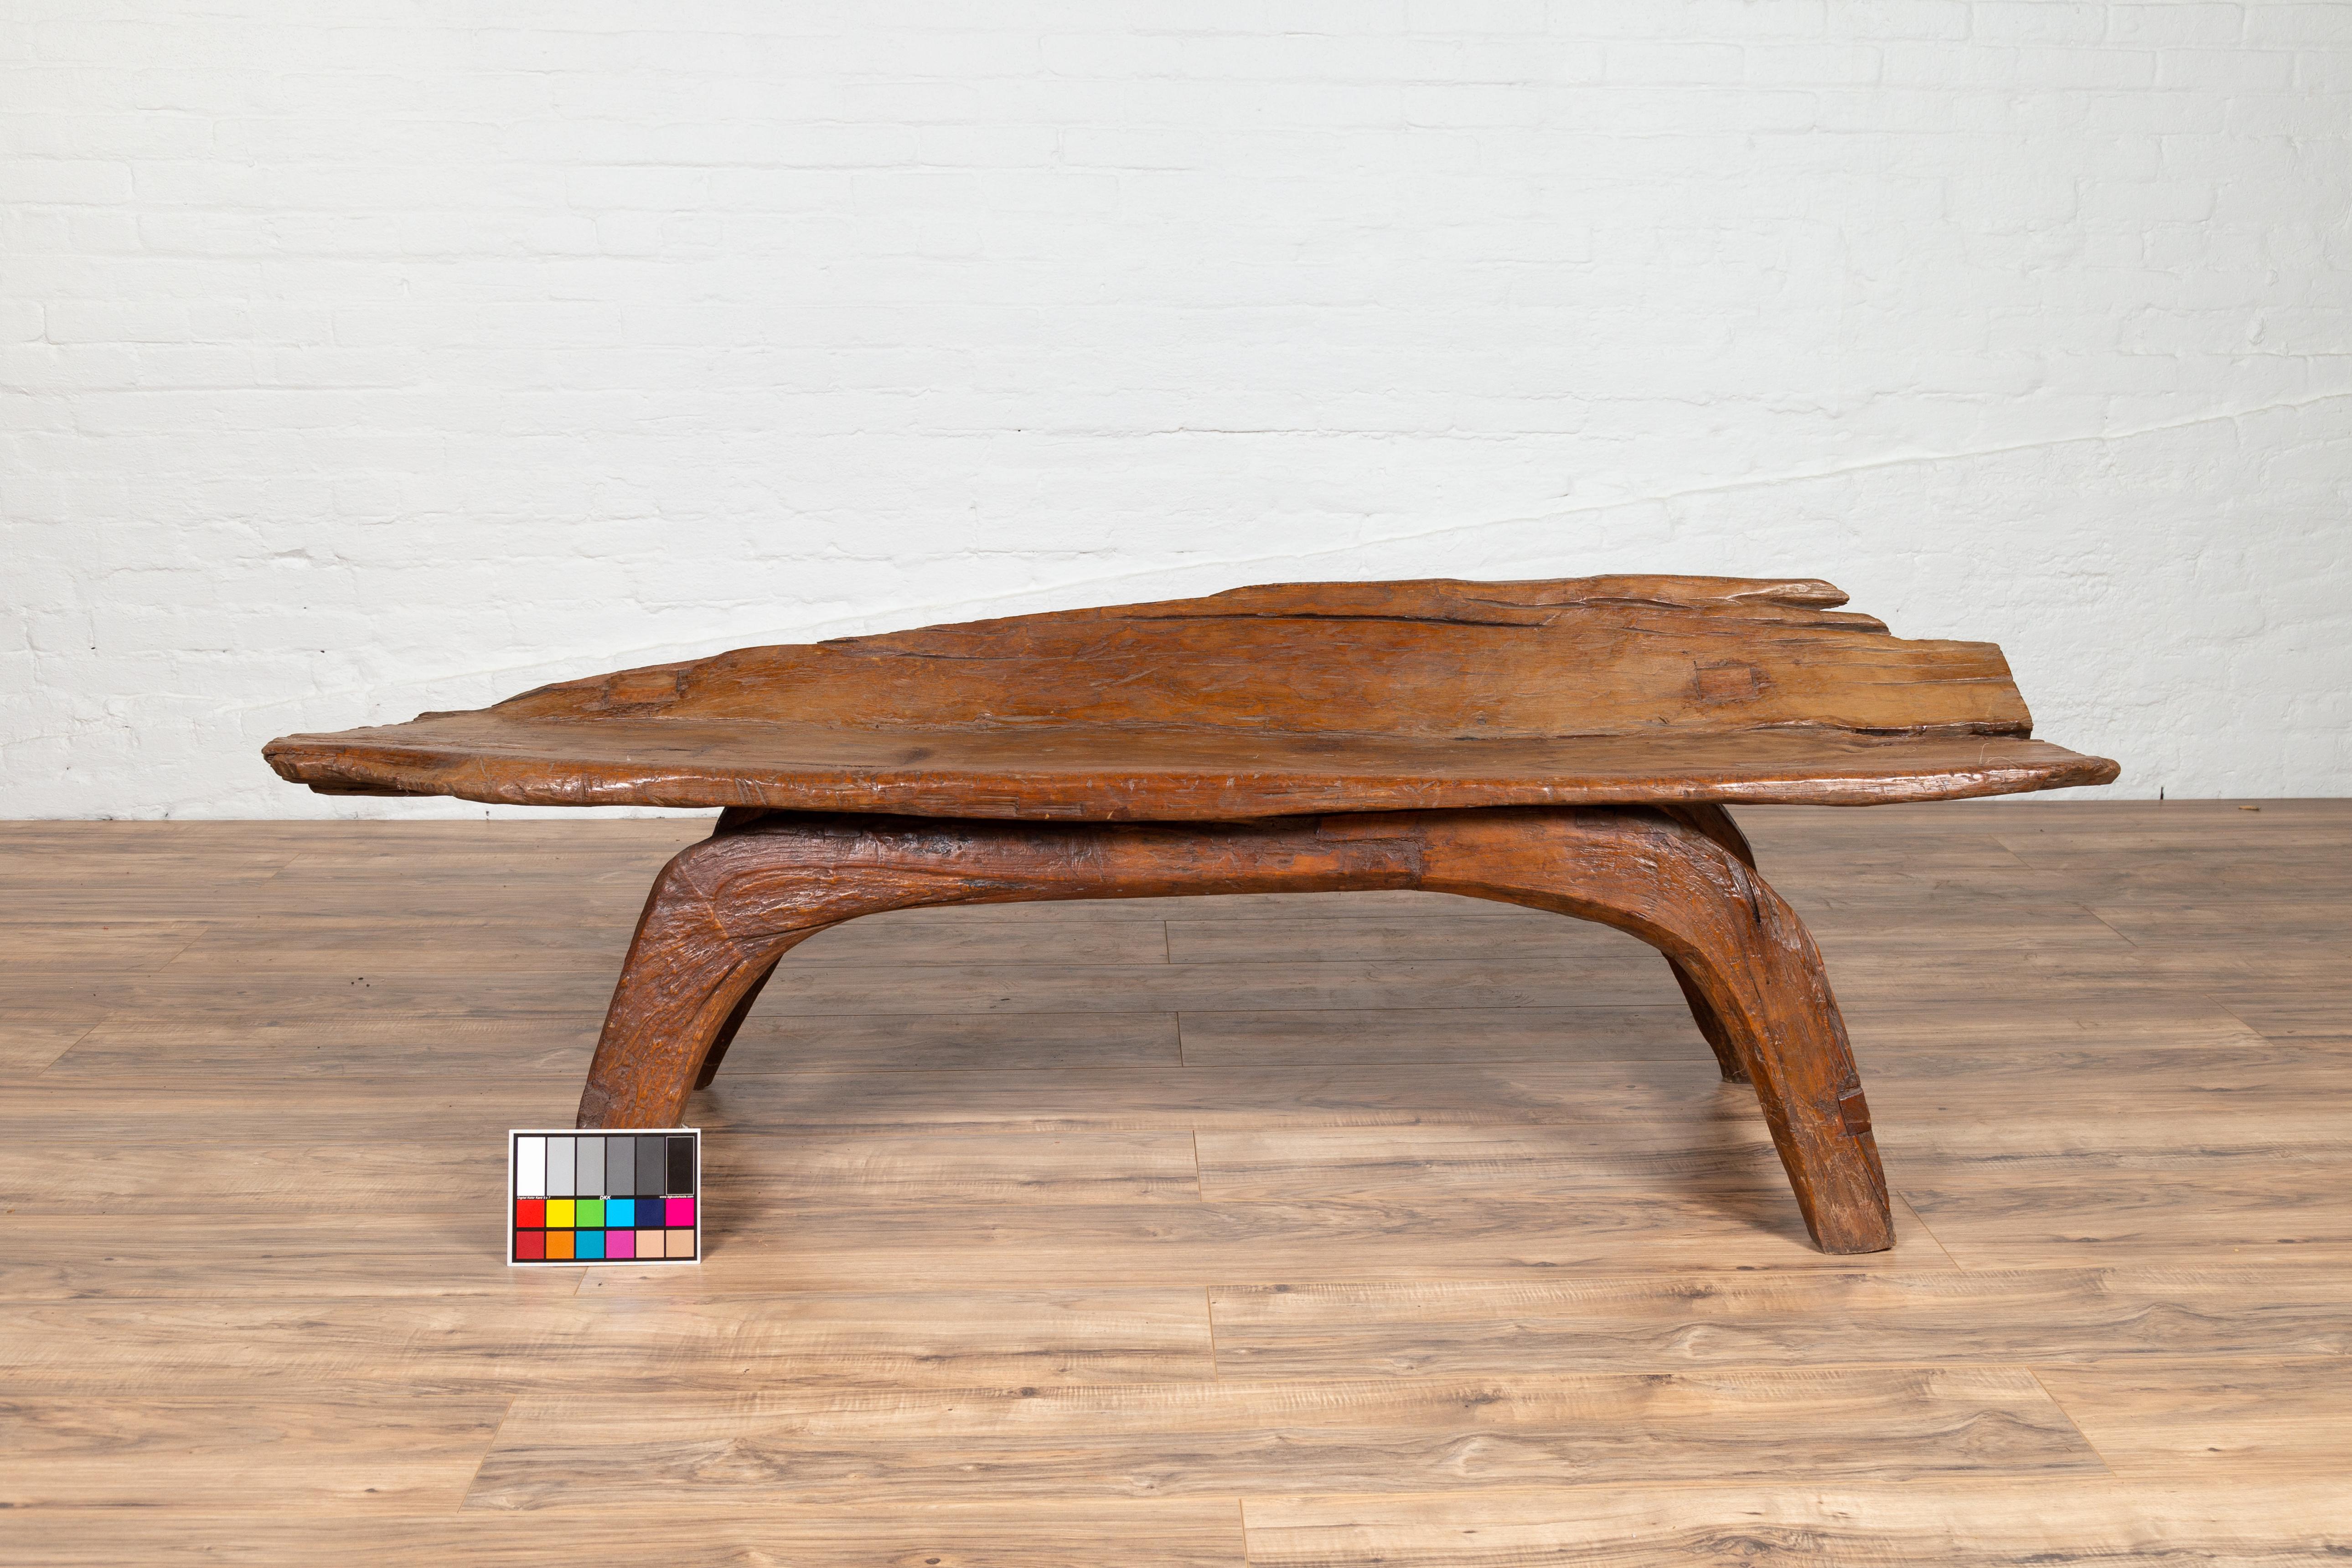 Freeform Design Antique Wooden Bench from the Riverbed of Bali with Arching Base 7